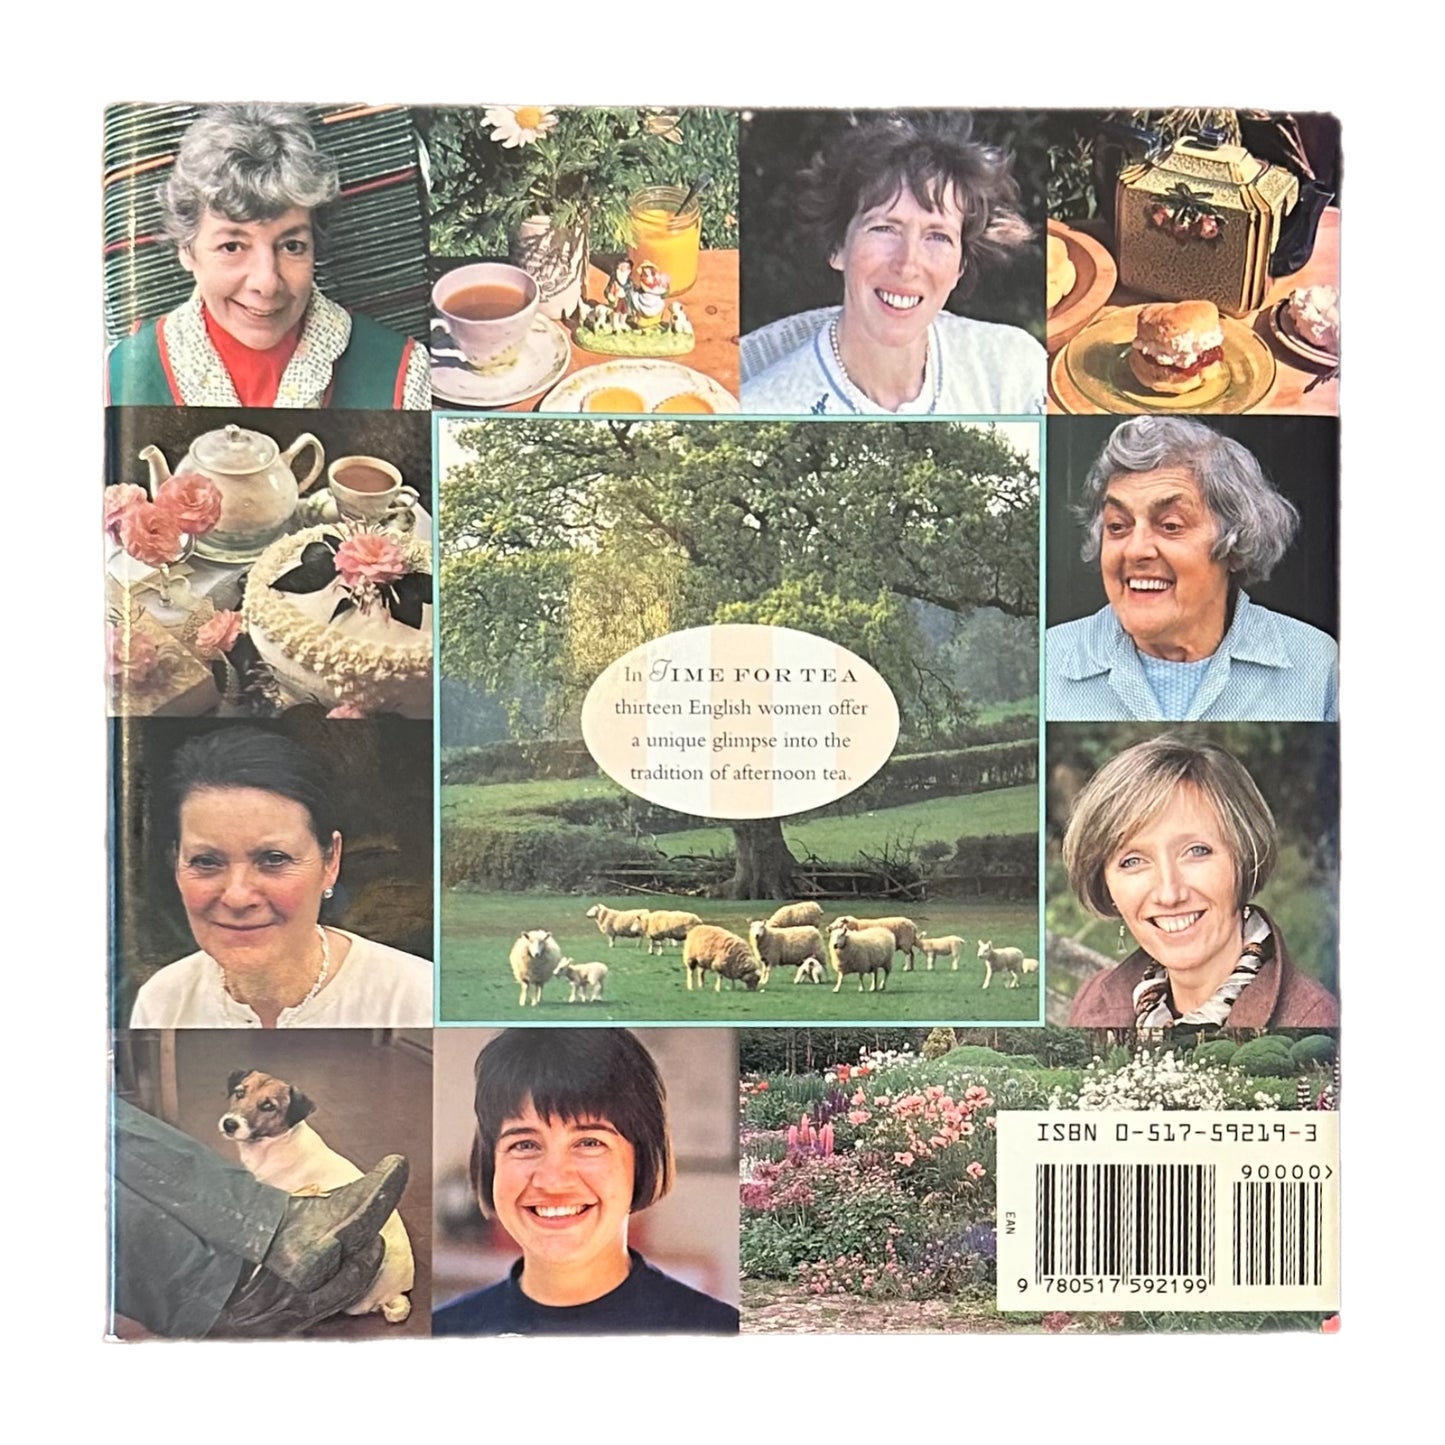 TIME FOR TEA: TEA CONVERSATIONS WITH THIRTEEN ENGLISH WOMEN (1995) by Michele Rivers